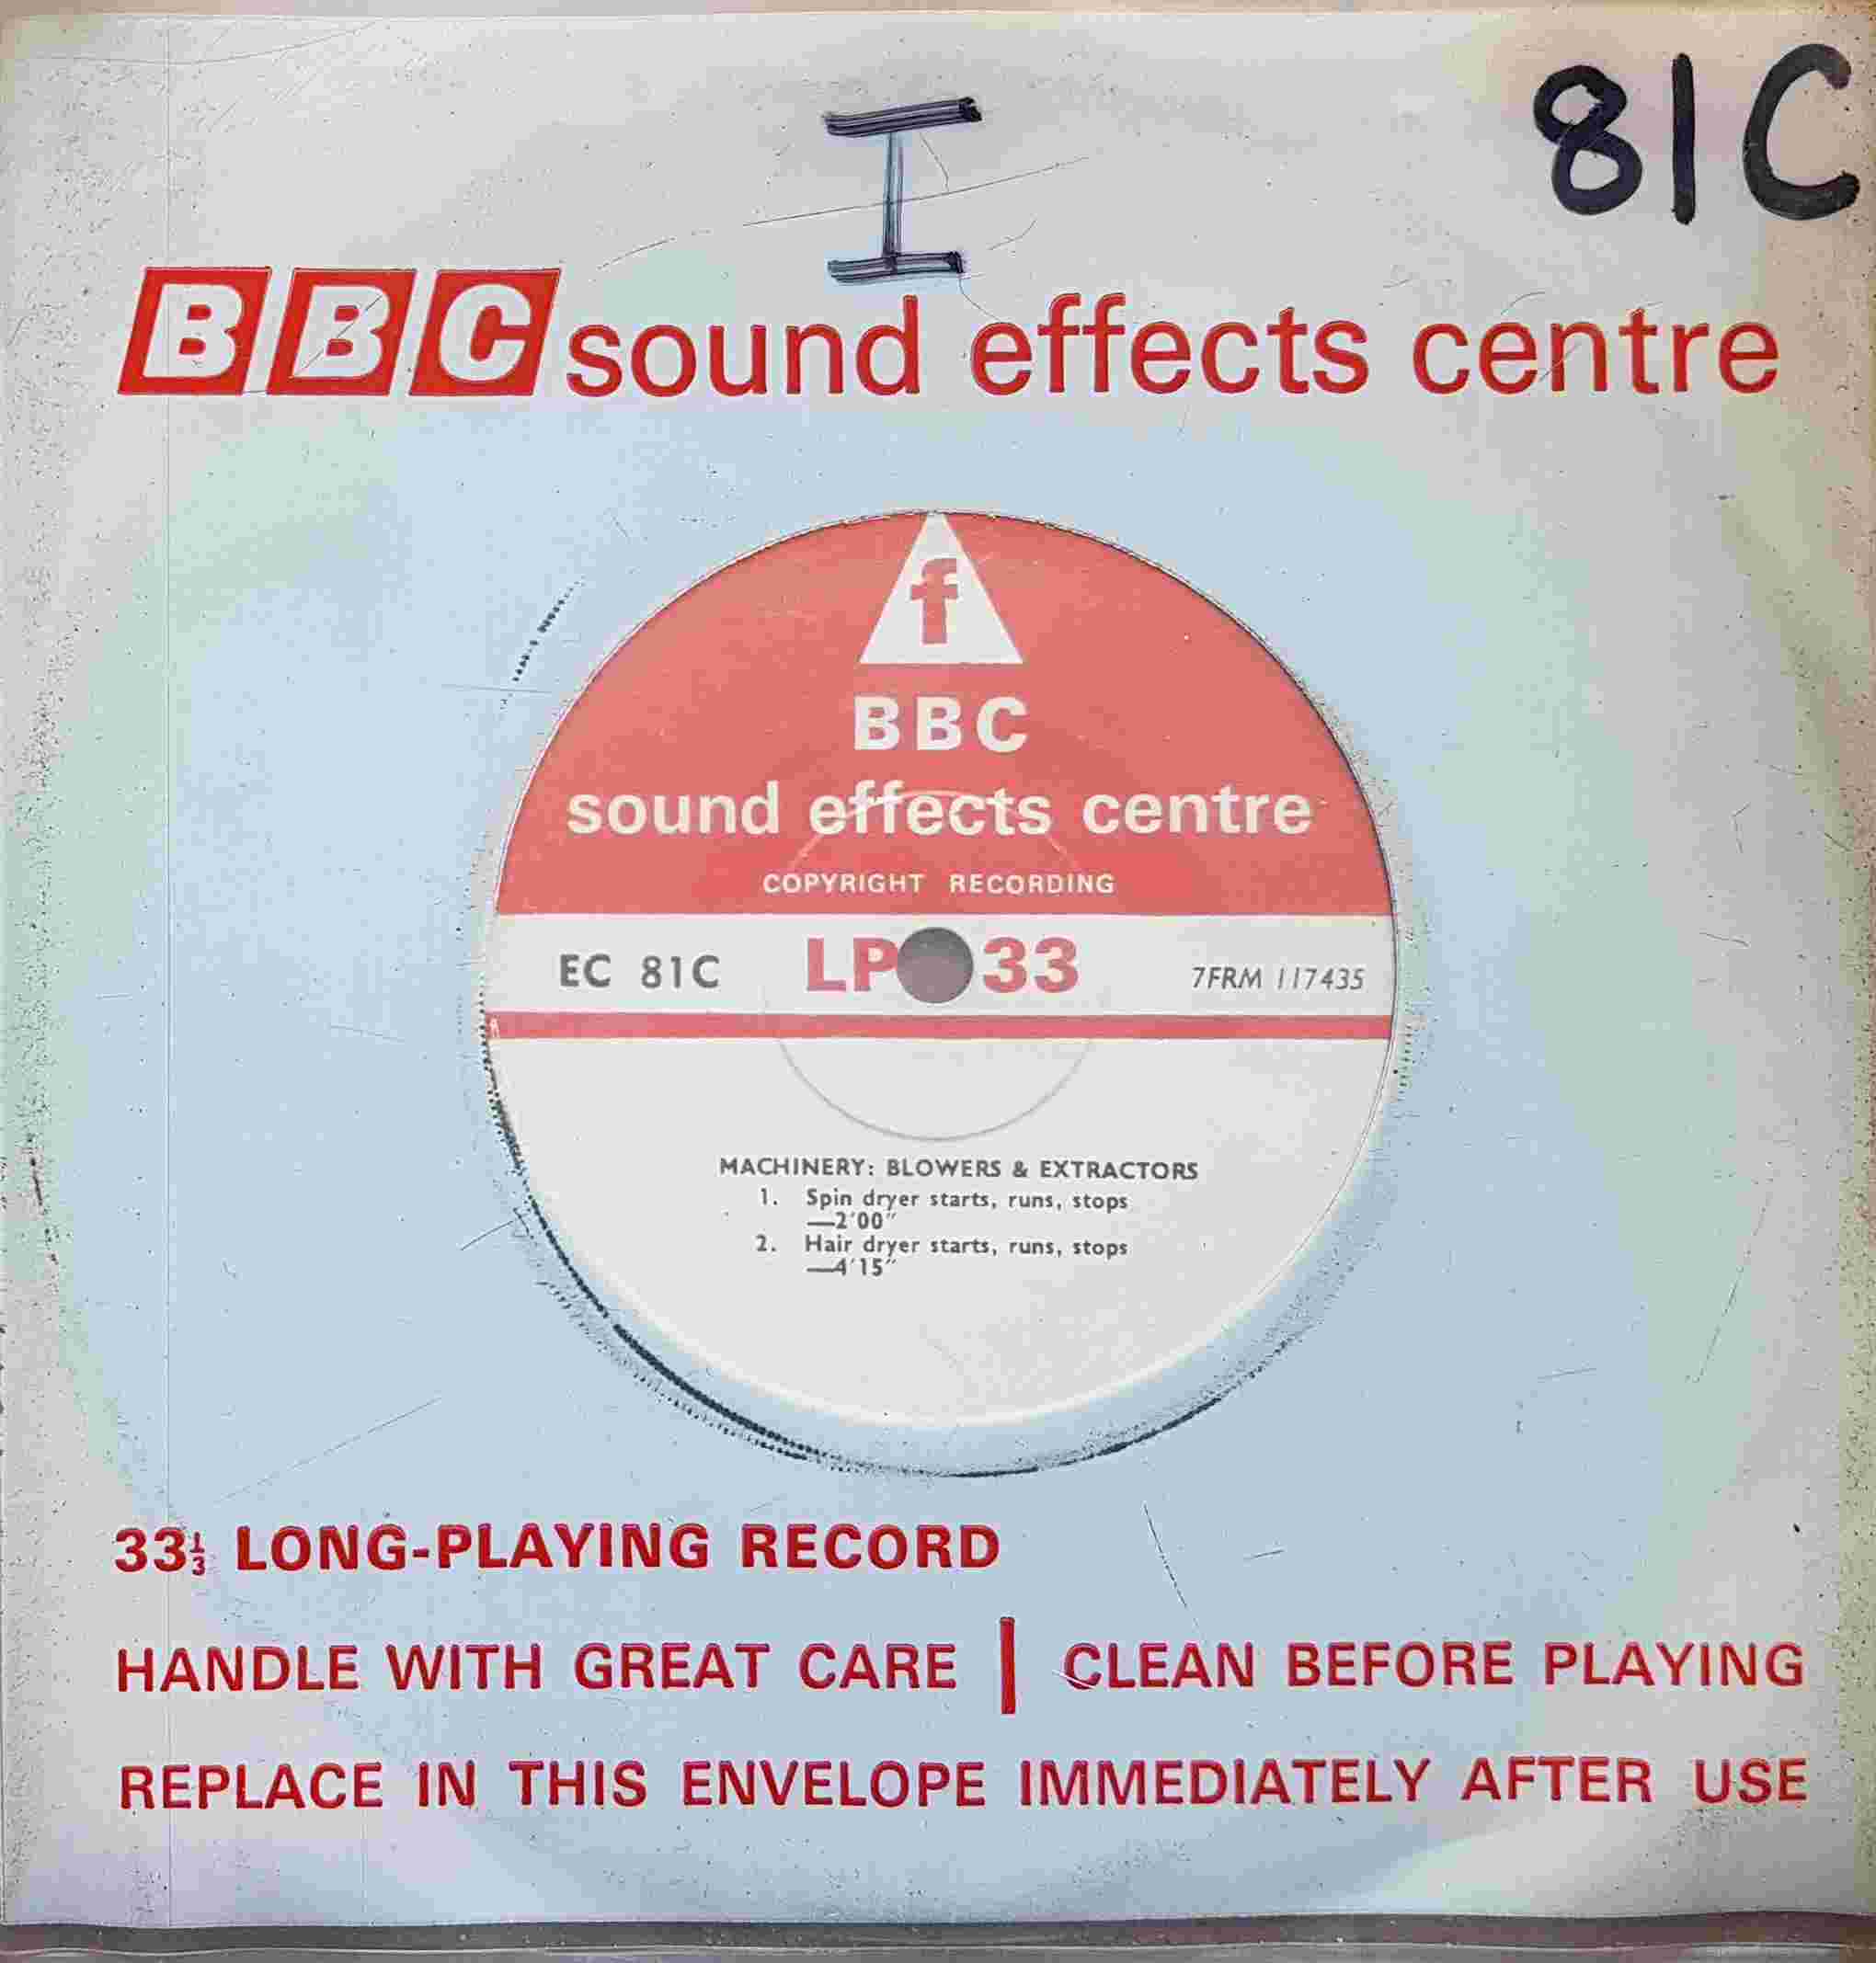 Picture of EC 81C Machinery: Blowers & extractors by artist Not registered from the BBC singles - Records and Tapes library